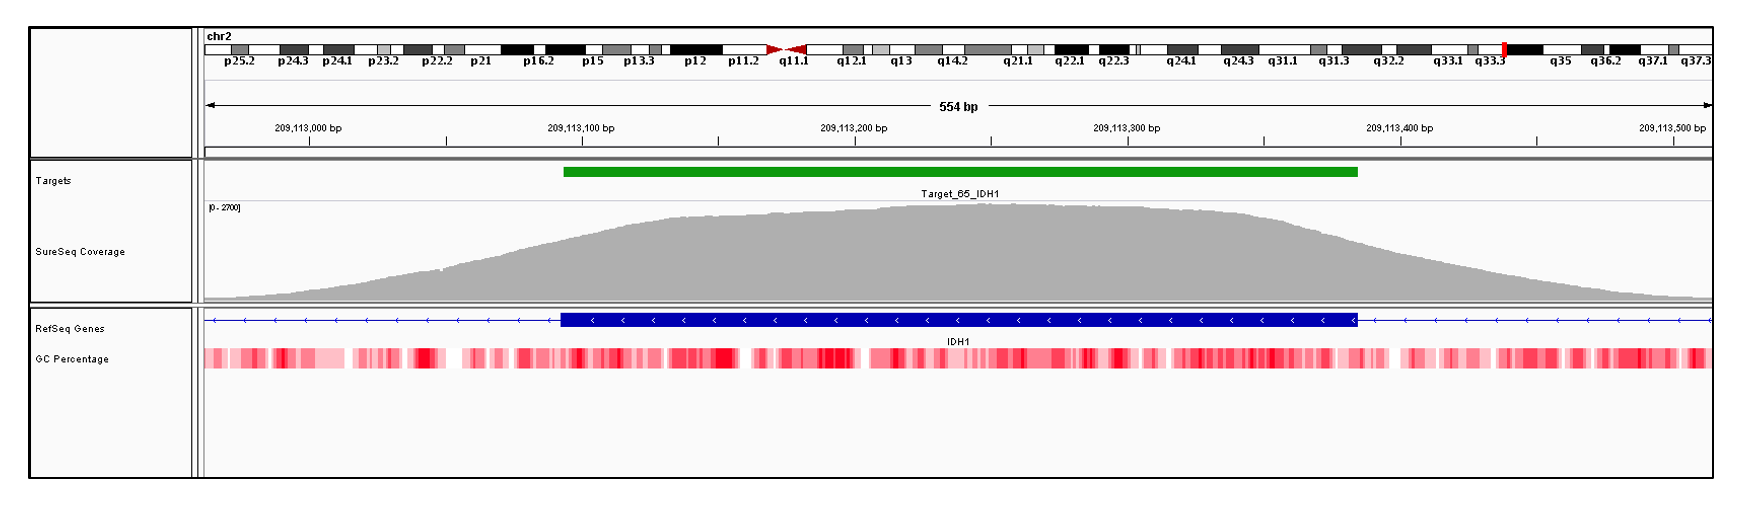 IDH1 Exon 4 (hg19 chr2:209113093-209113384). Depth of coverage per base (grey). Targeted region (green). Gene coding region as defined by RefSeq (blue). GC percentage (red). Image